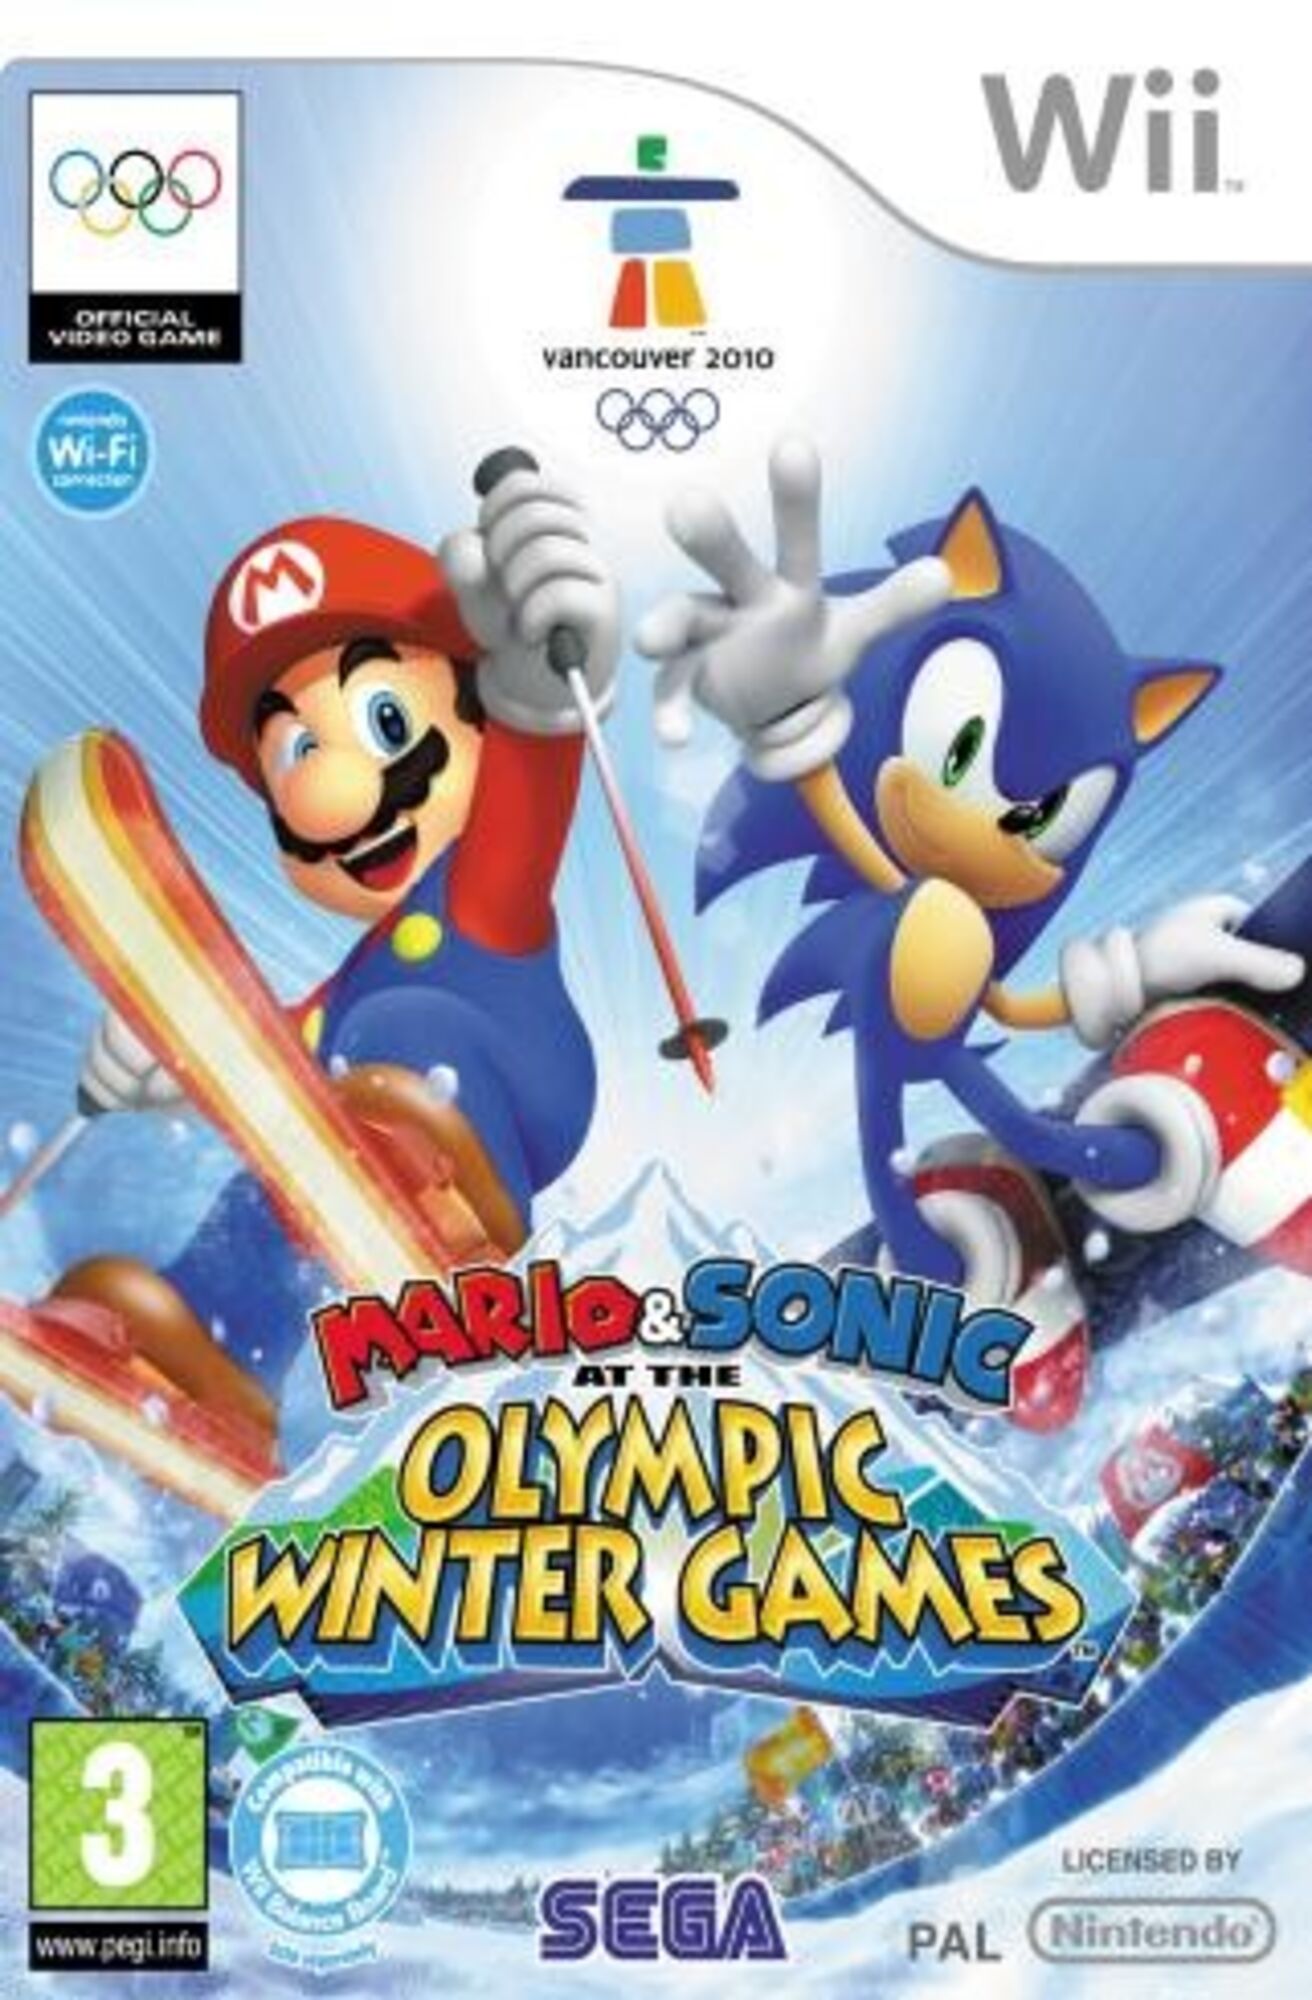 Mario & Sonic at the Olympic Winter Games Nintendo